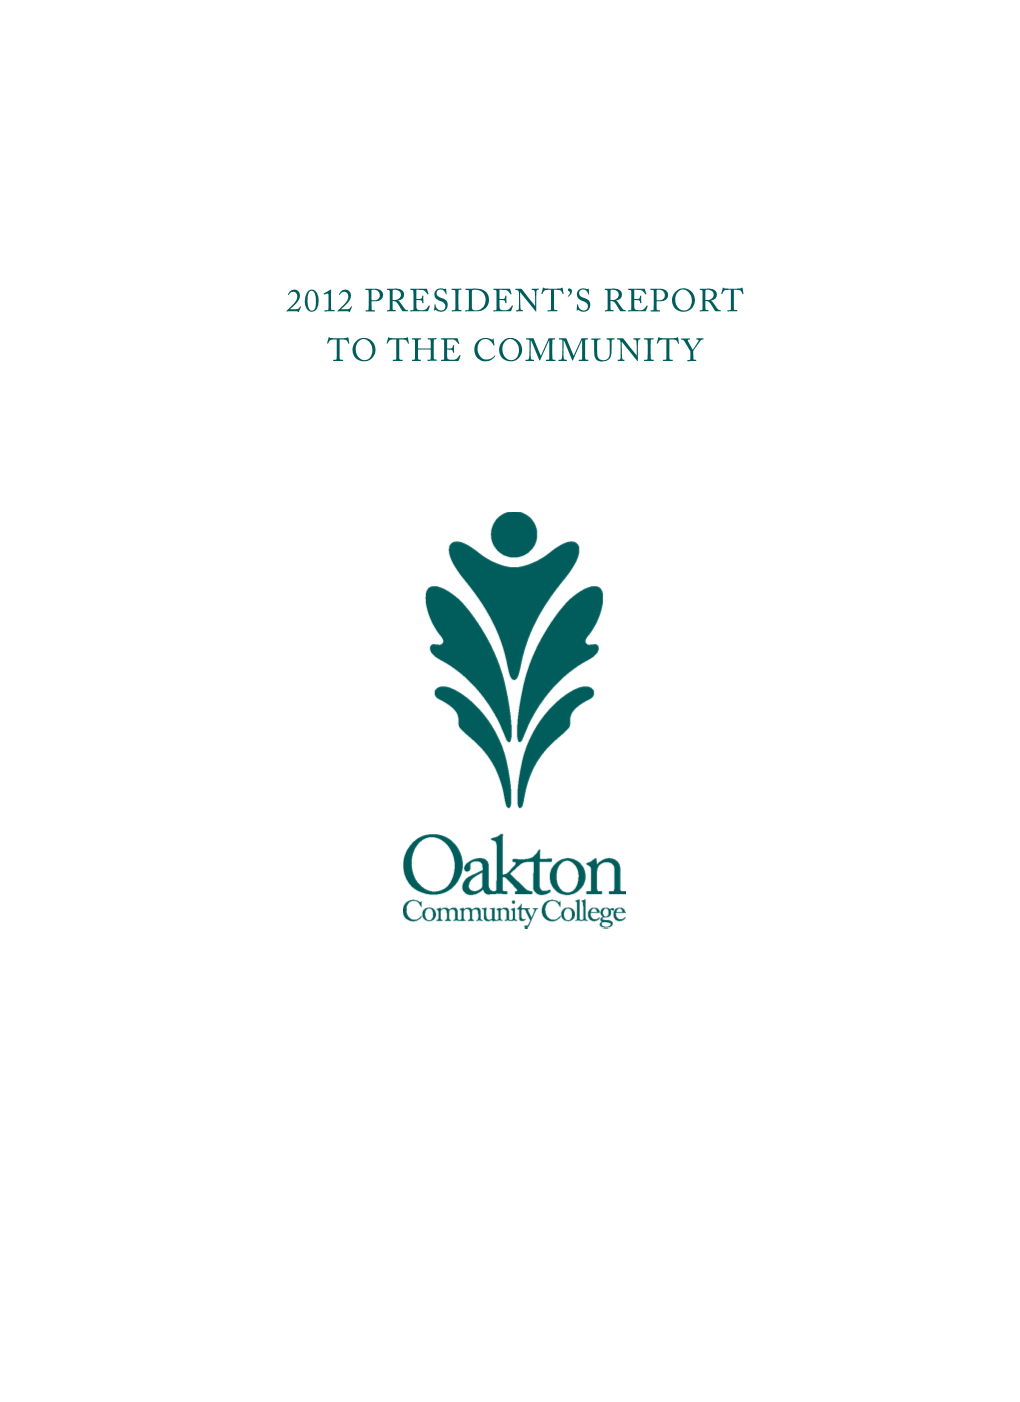 2012 President's Report to the Community